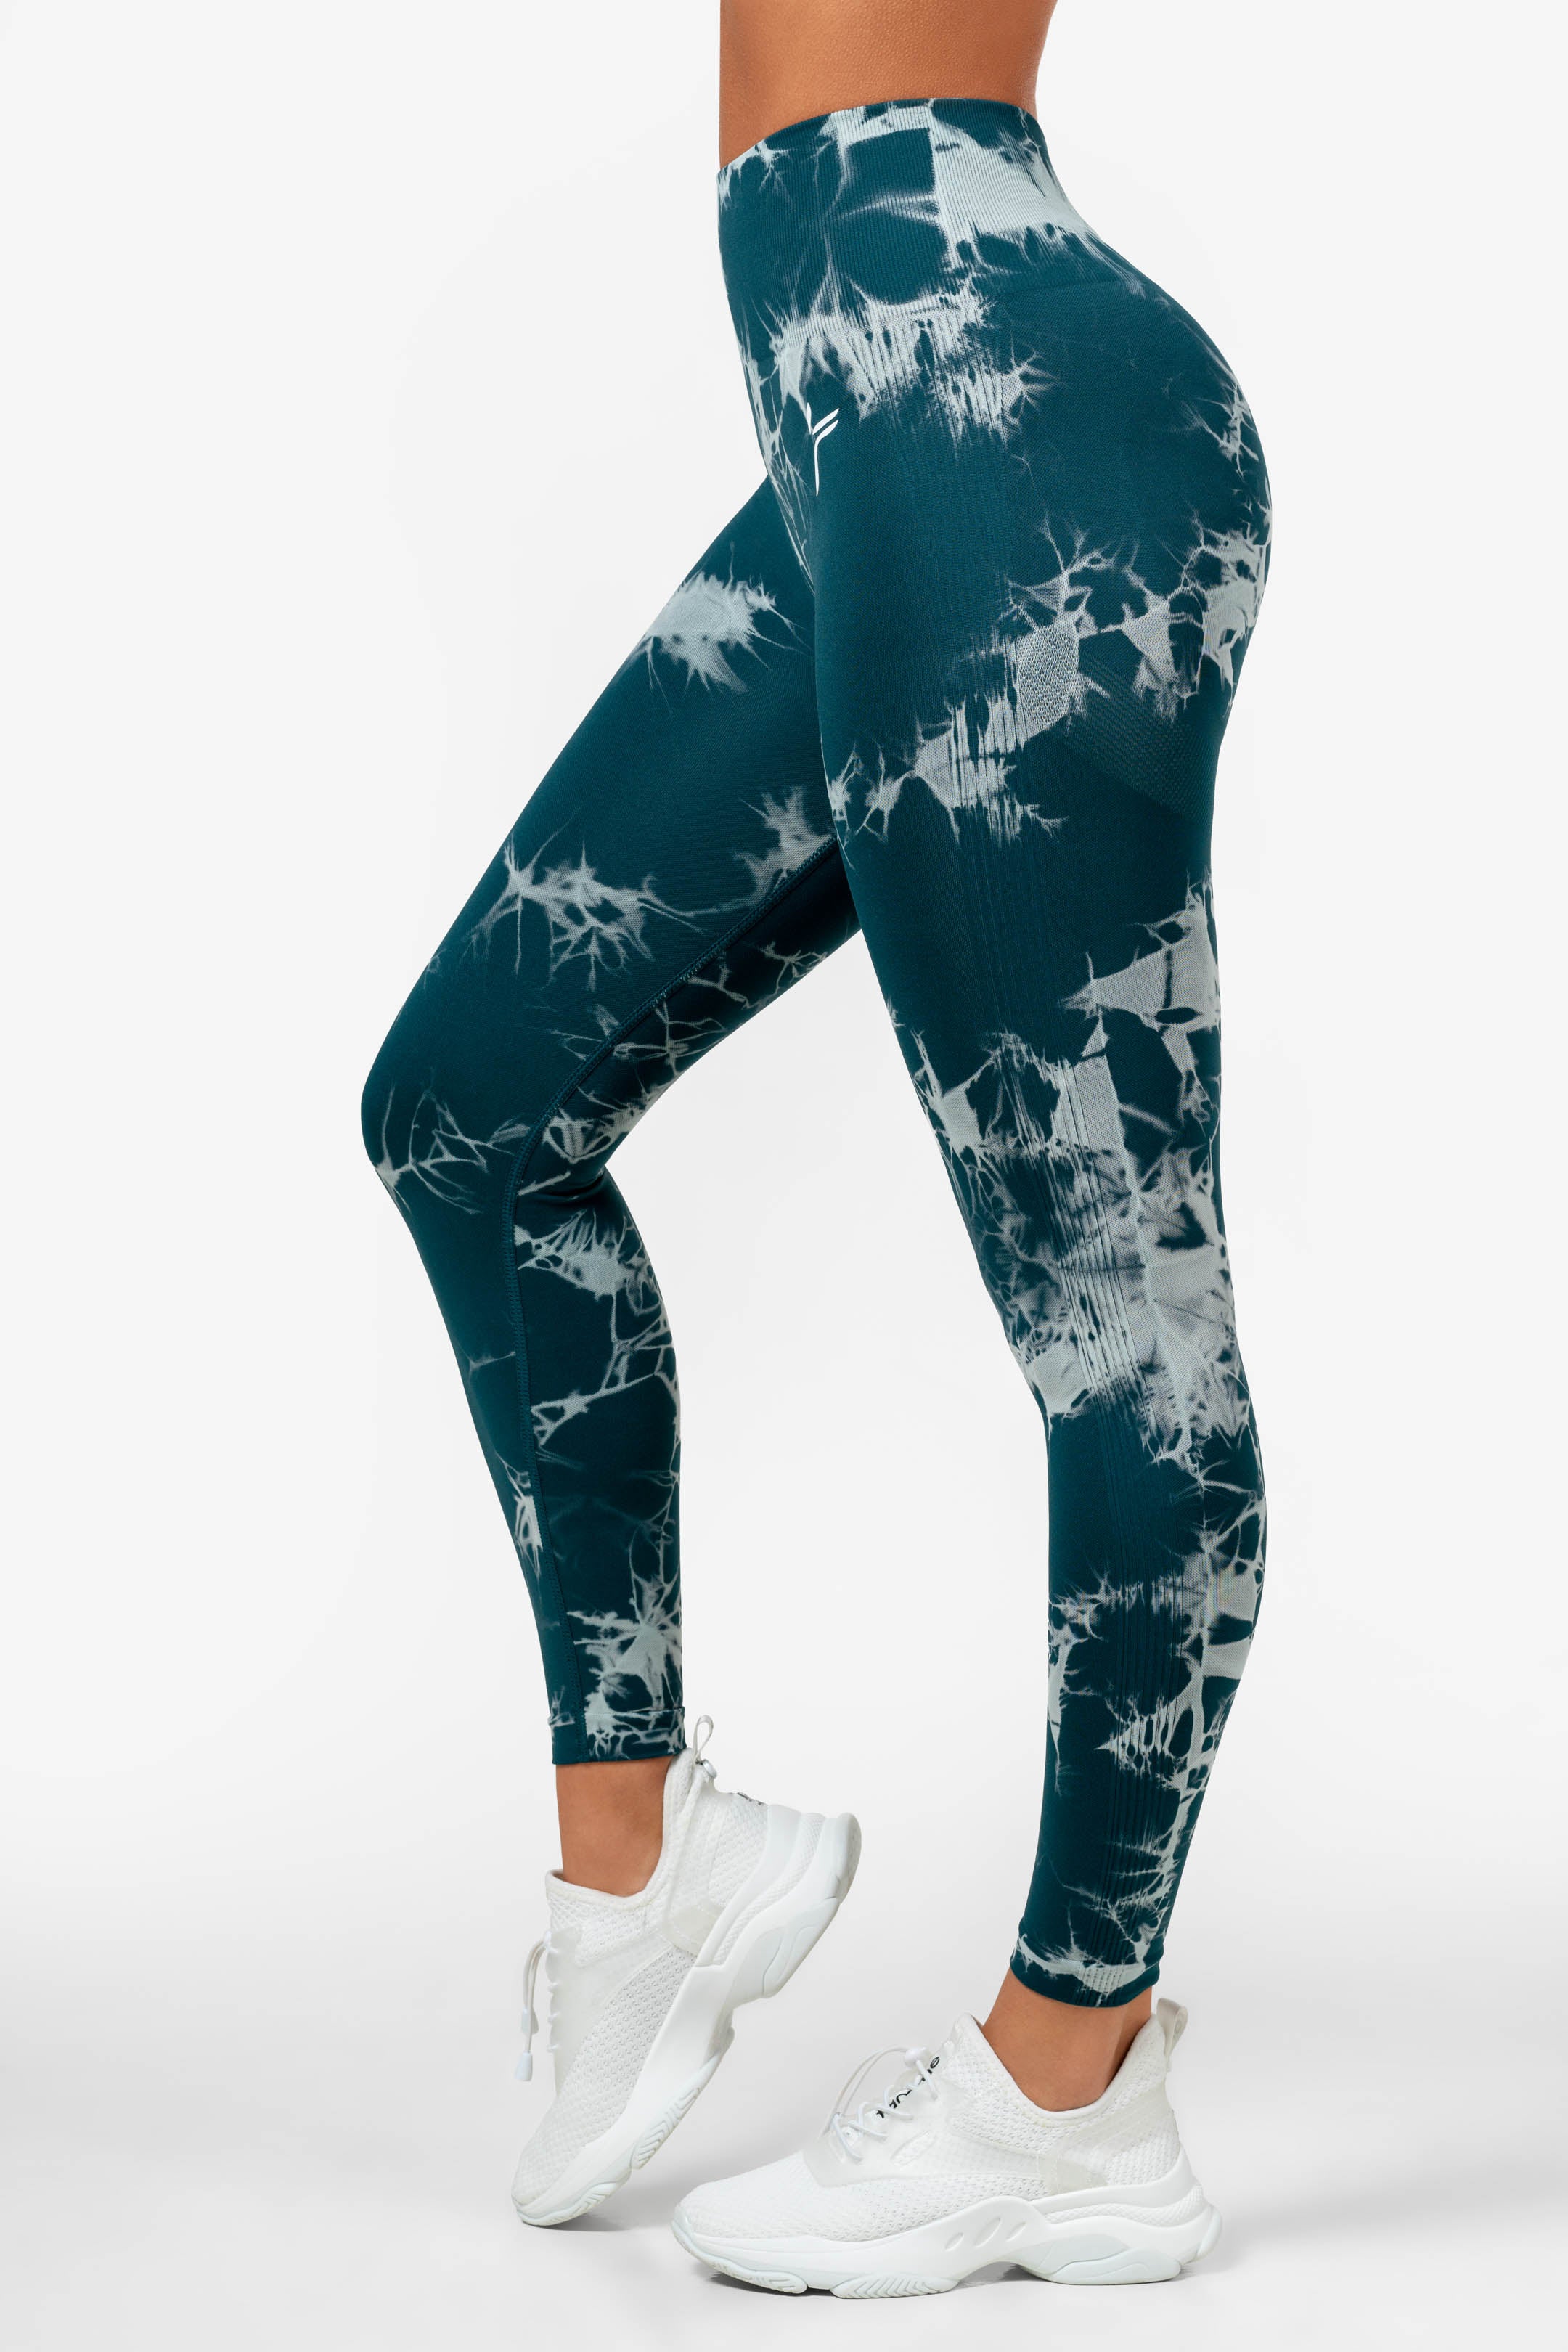 Tie Dye Scrunch Leggings | Seamless tights | Free shipping and returns